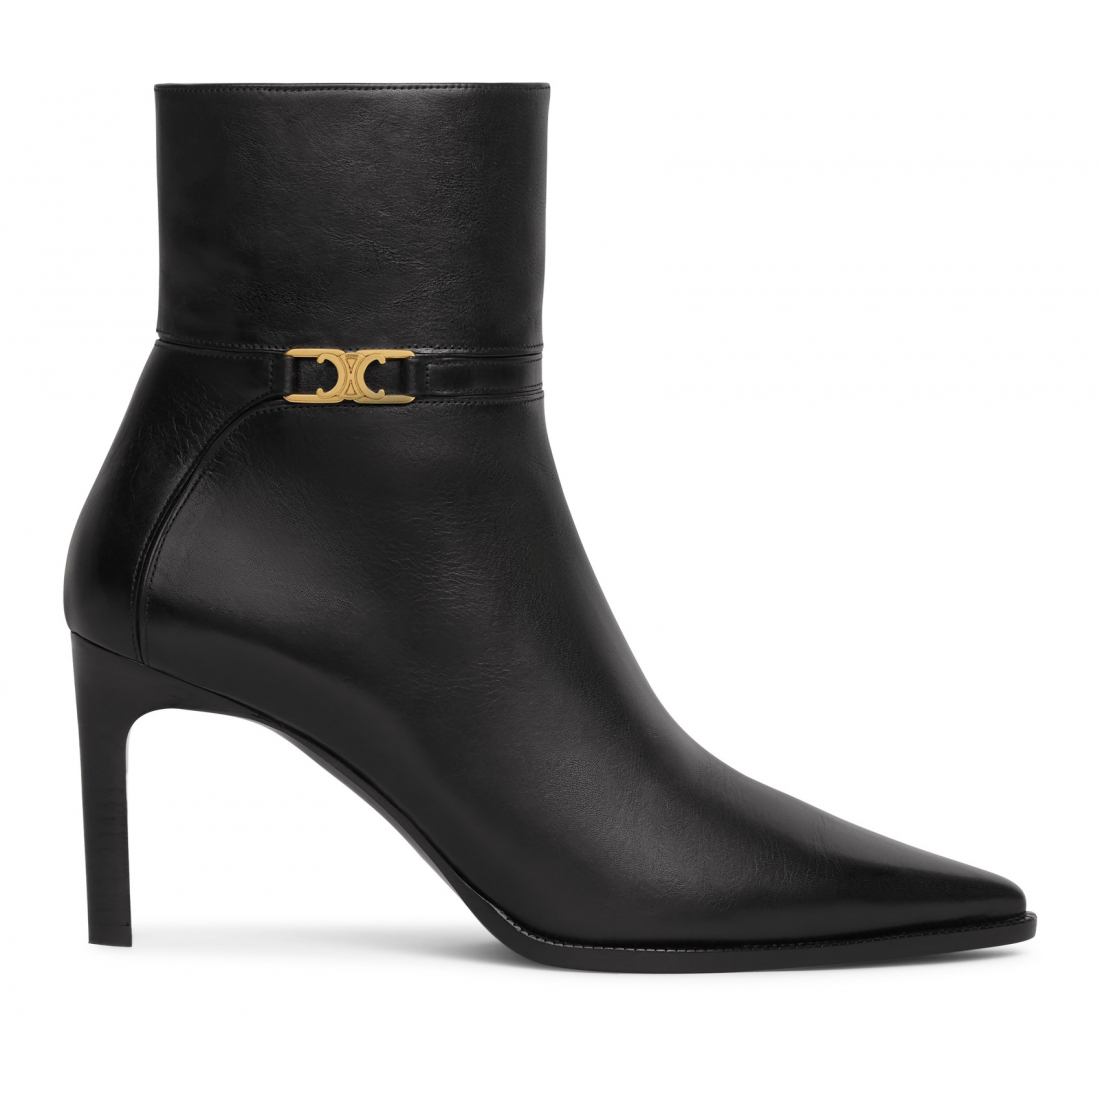 Women's 'Verneuil' Ankle Boots